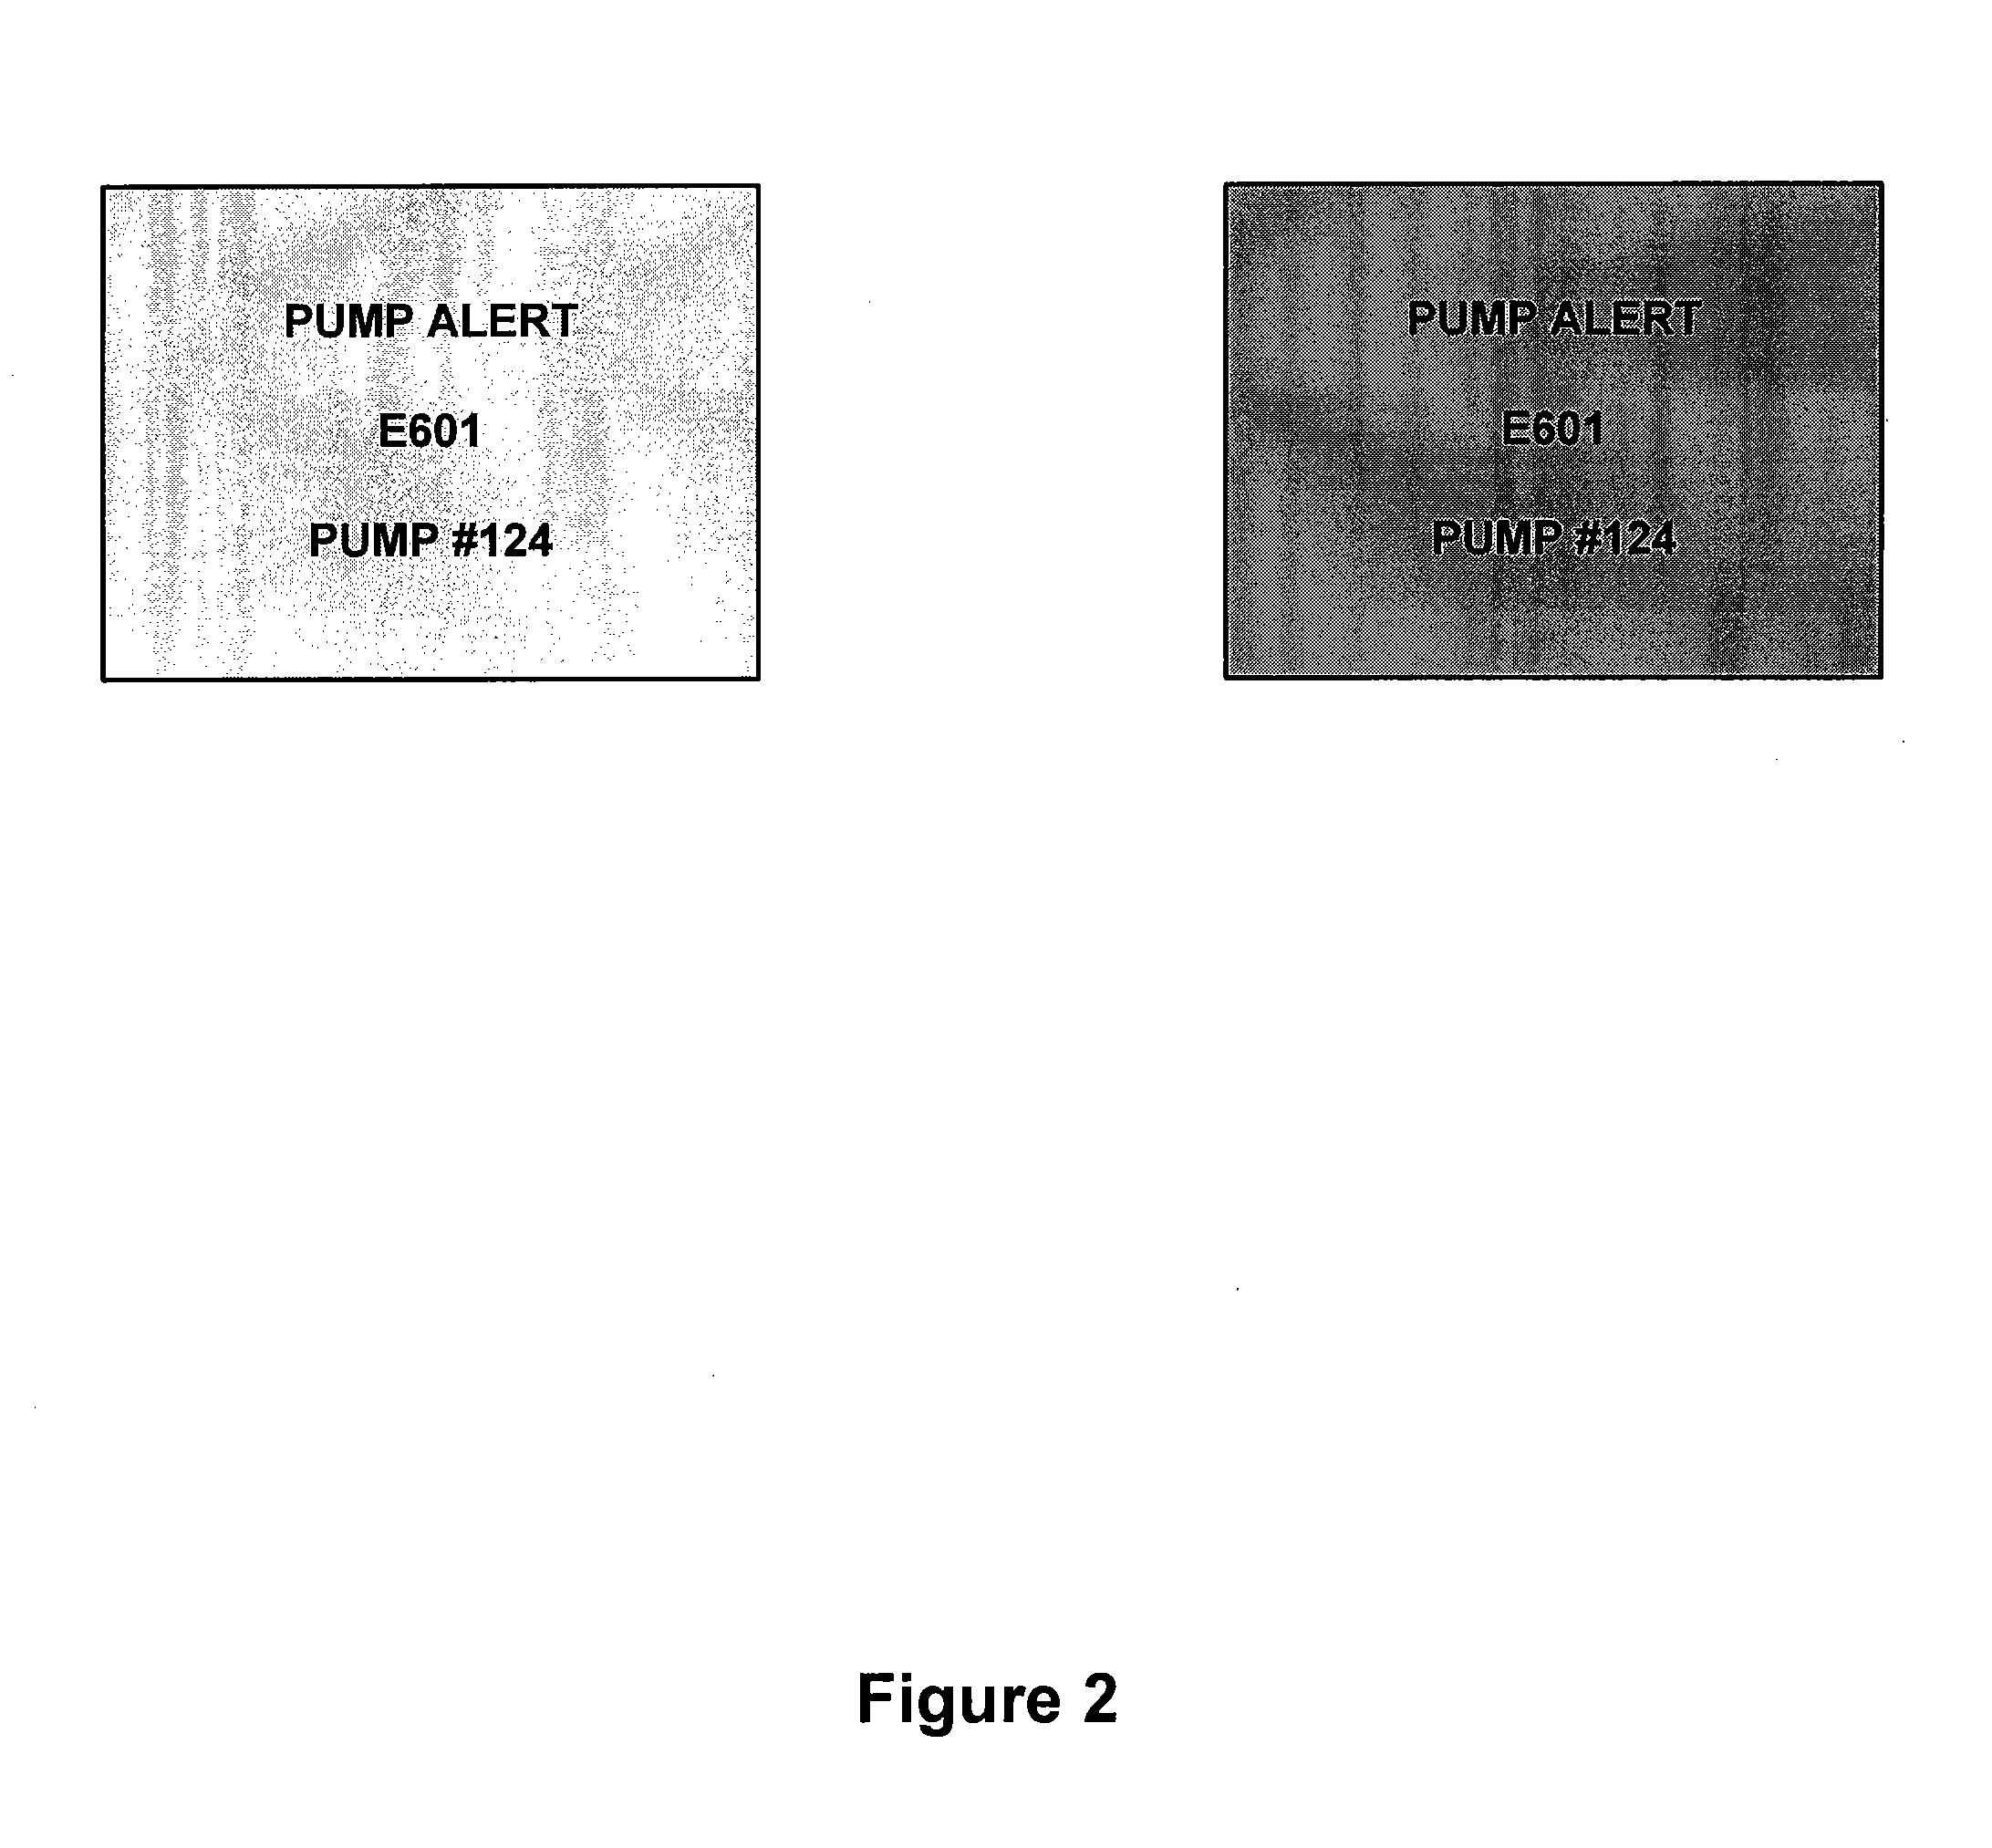 Device alert system and method